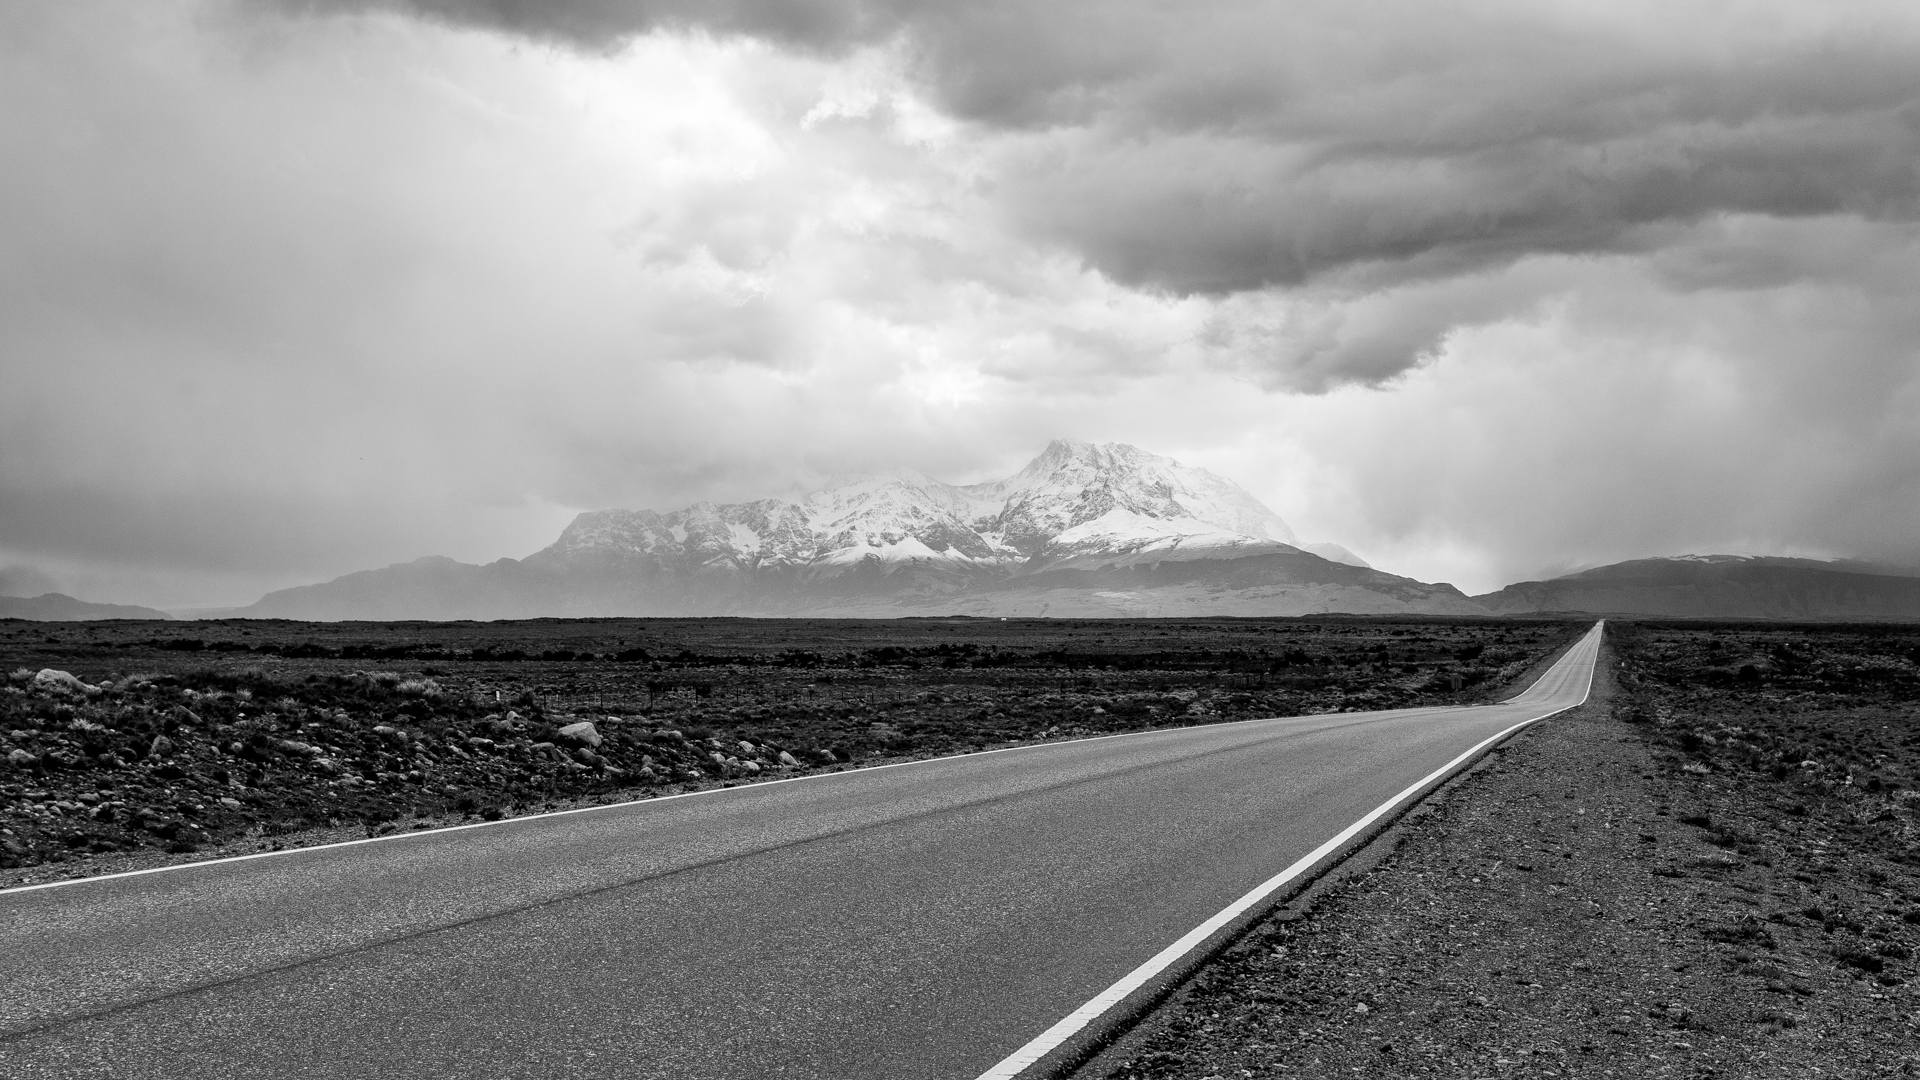 black and white: a two-lane road across a dessert with mountains in the distance and cloudy sky above